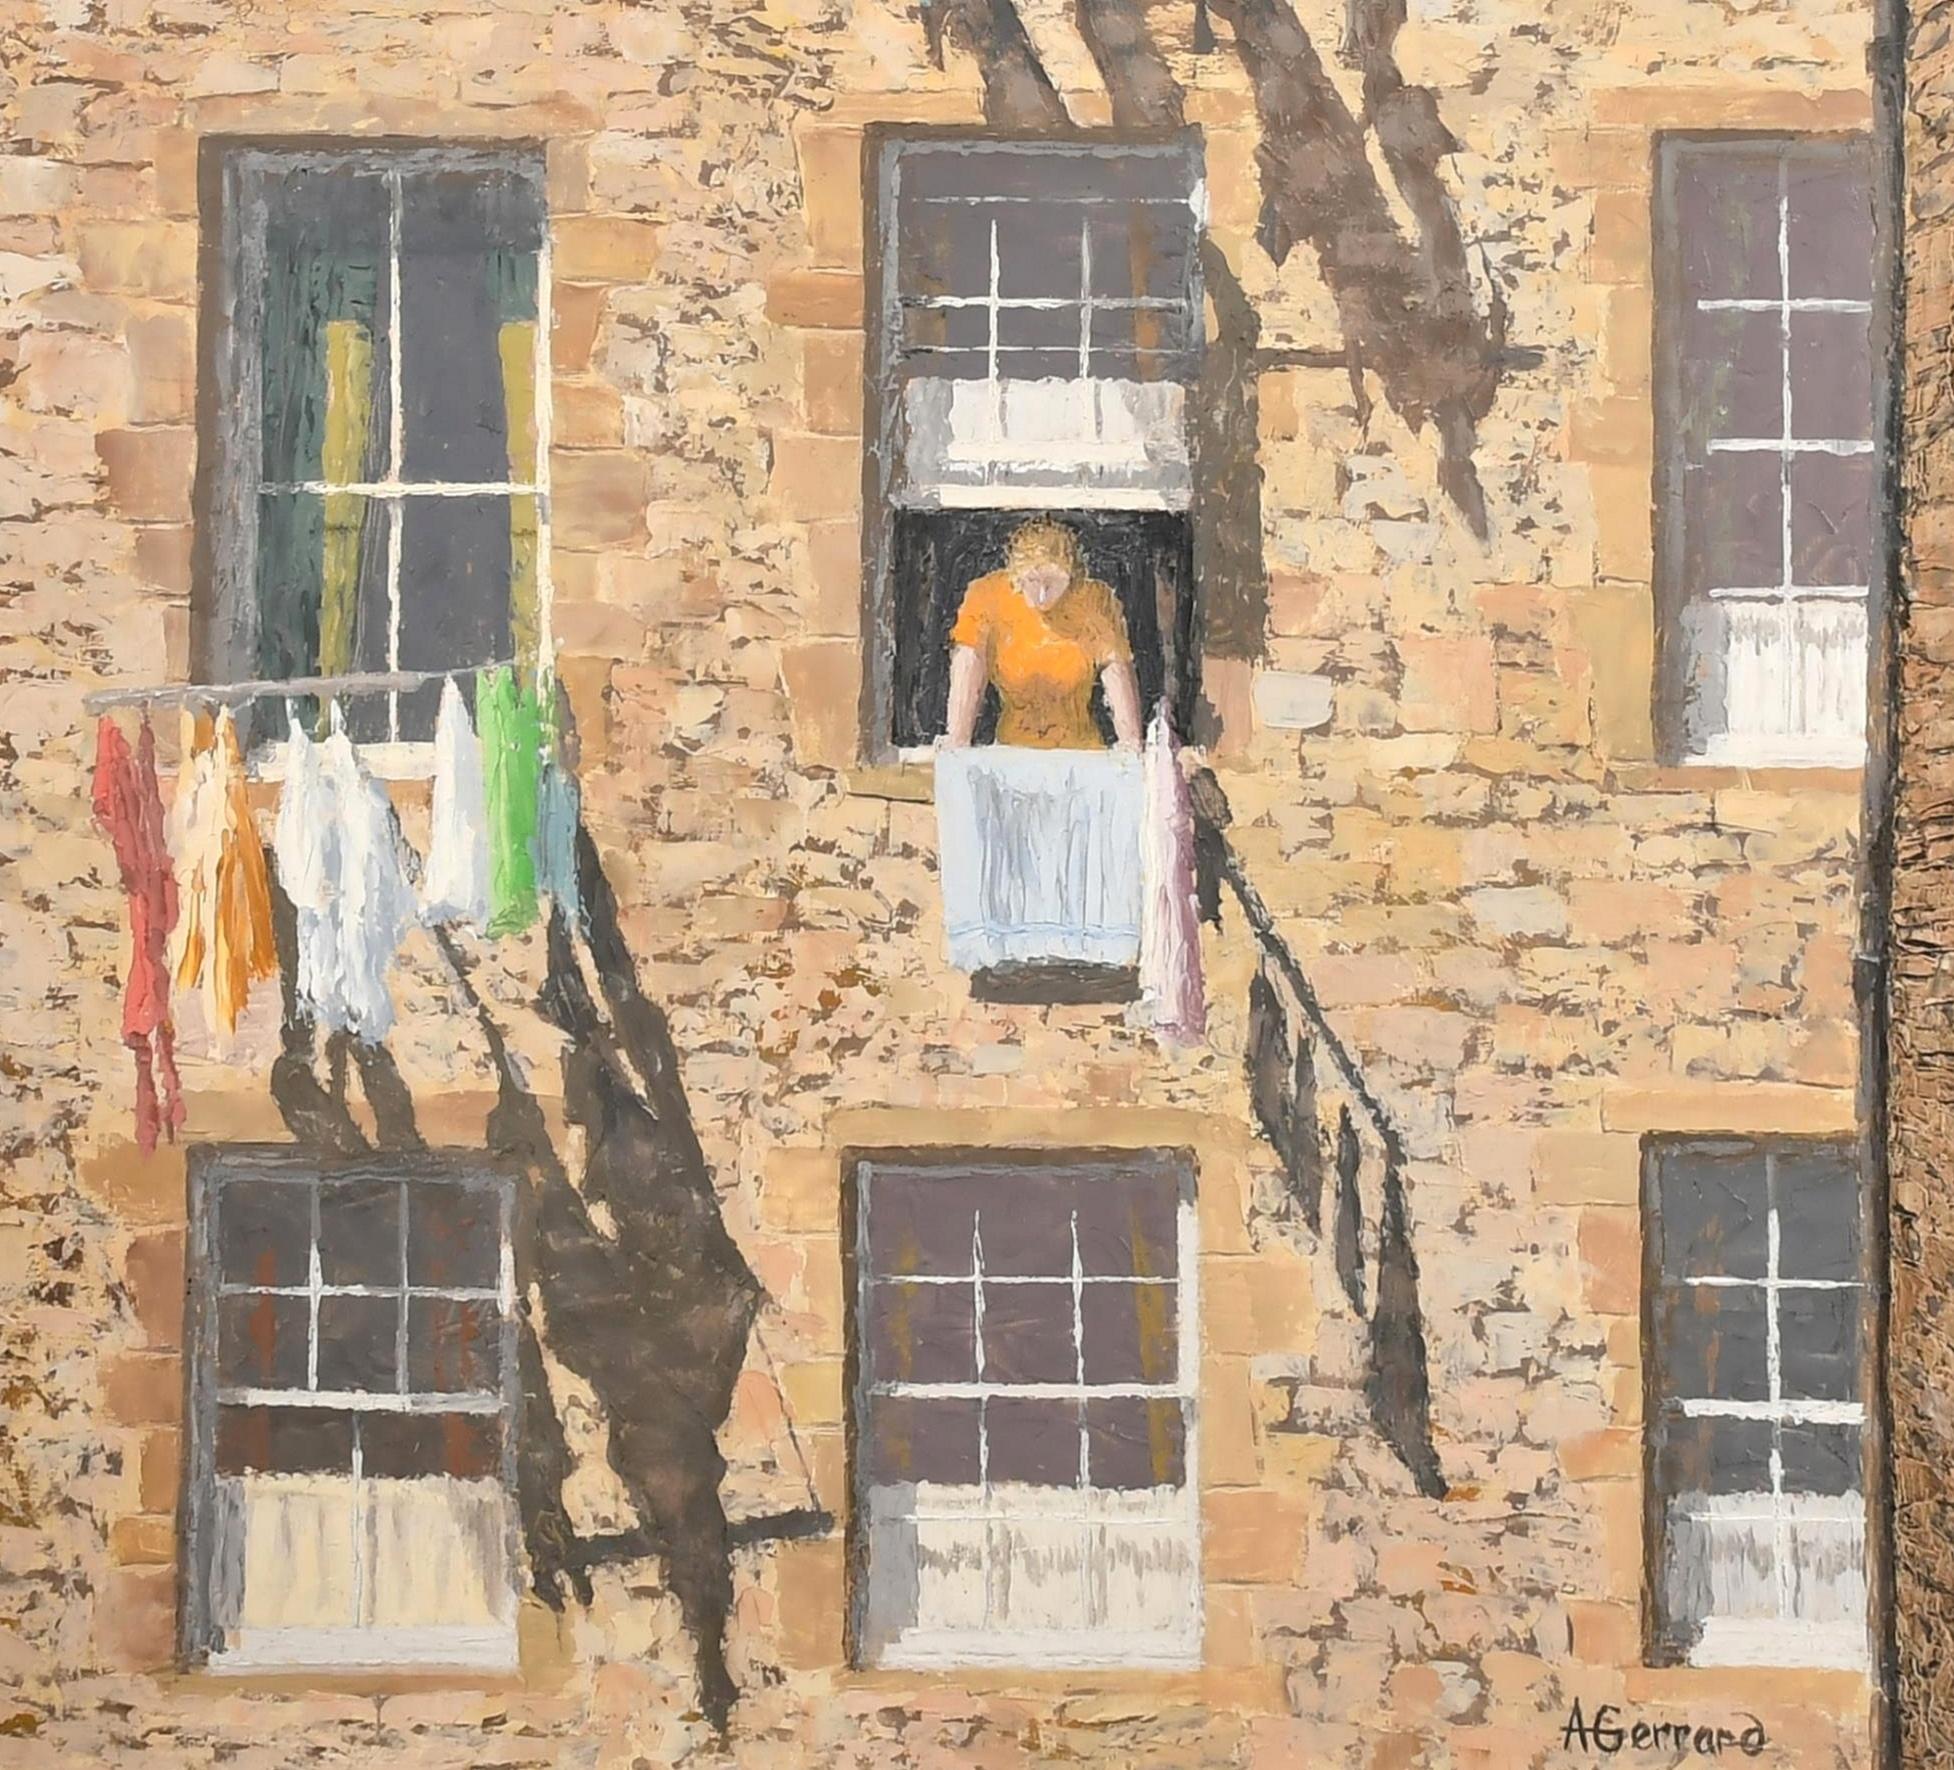 A superb large 1950's oil on board which we believe to depict the tenement buildings of the Milnes Court area in Edinburgh. Clothes hang from T shaped driers as a lady hangs her washing from a sash window. The distinctive single four pane window in